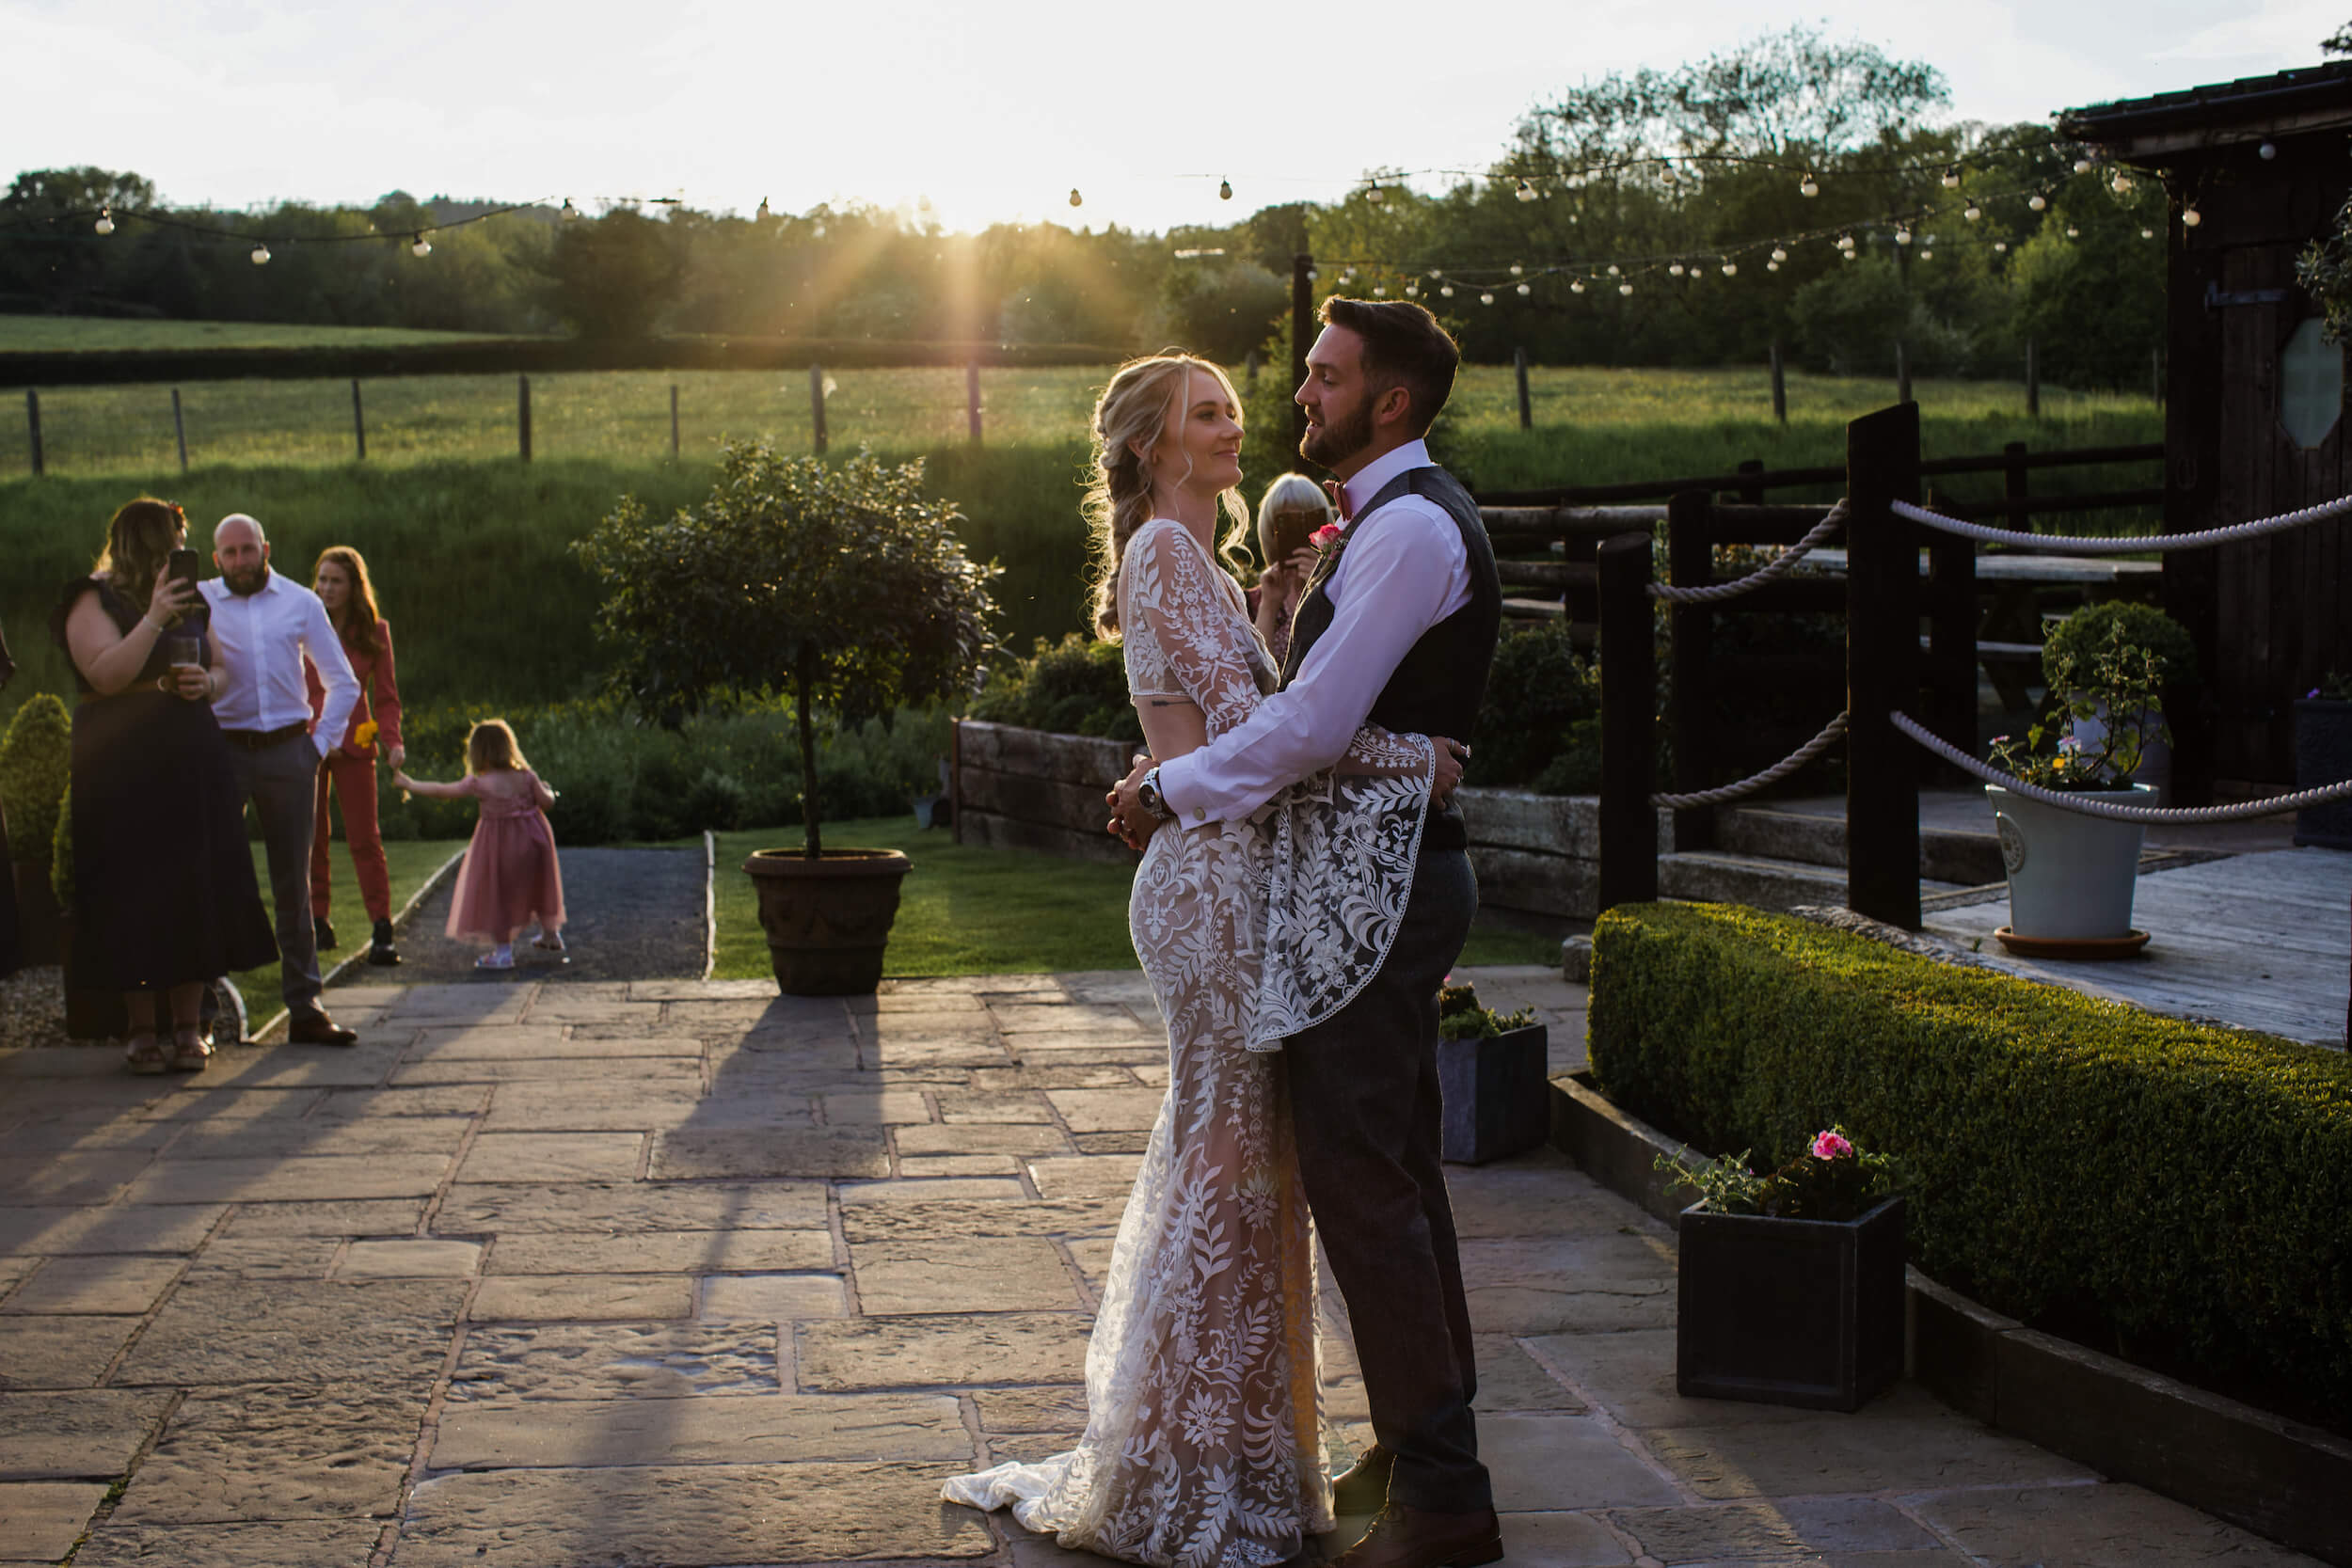 just married couple - wedding portraits - first dance on the terrace in golden hour at dusk - Sally Joanne photography